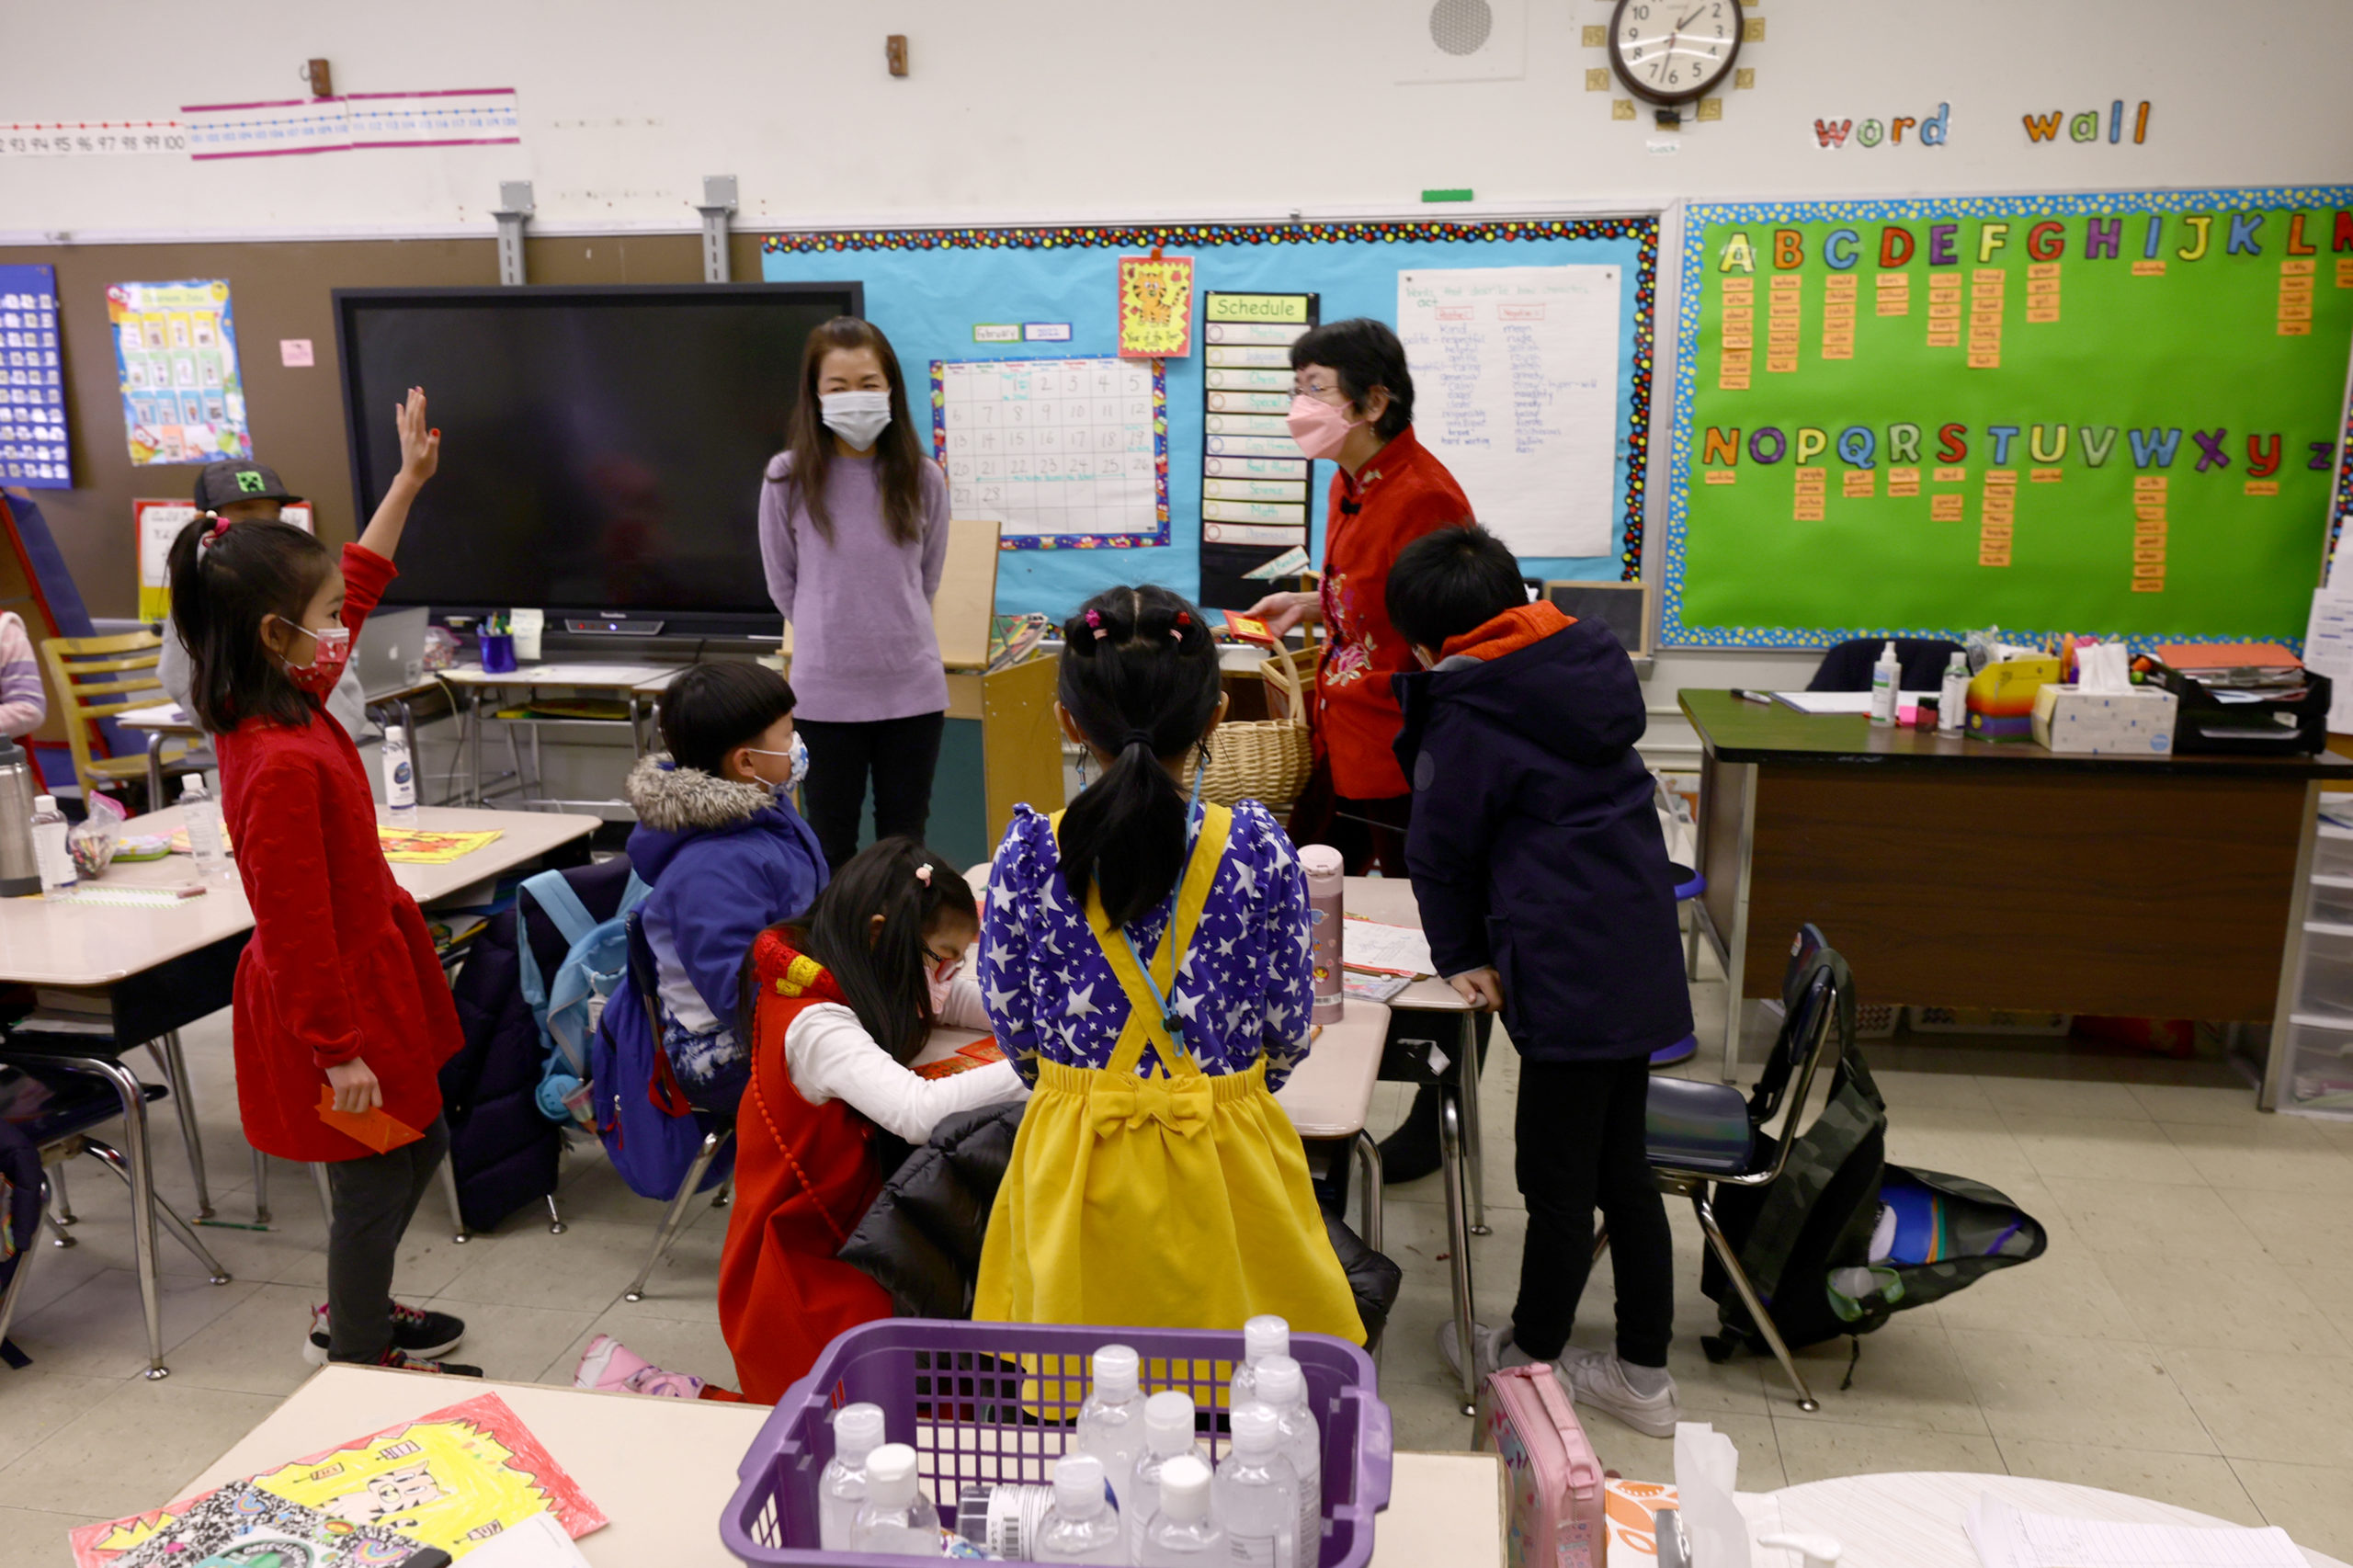 Taking a break from handing out red envelopes and candy in a cultural celebration of the Lunar New Year, Principal Alice Hom talks with schoolteacher Sau Sheung Lau at Yung Wing School P.S. 124 on February 02, 2022 in New York City. NYC schools were closed yesterday in observance of what is considered the most important day in the Chinese calendar with the start of the New Year. This event is not only relevant in Asia, but also in other countries where this Chinese tradition is respected and celebrated and is on the table to become the next US Federal Holiday. (Photo by Michael Loccisano/Getty Images)